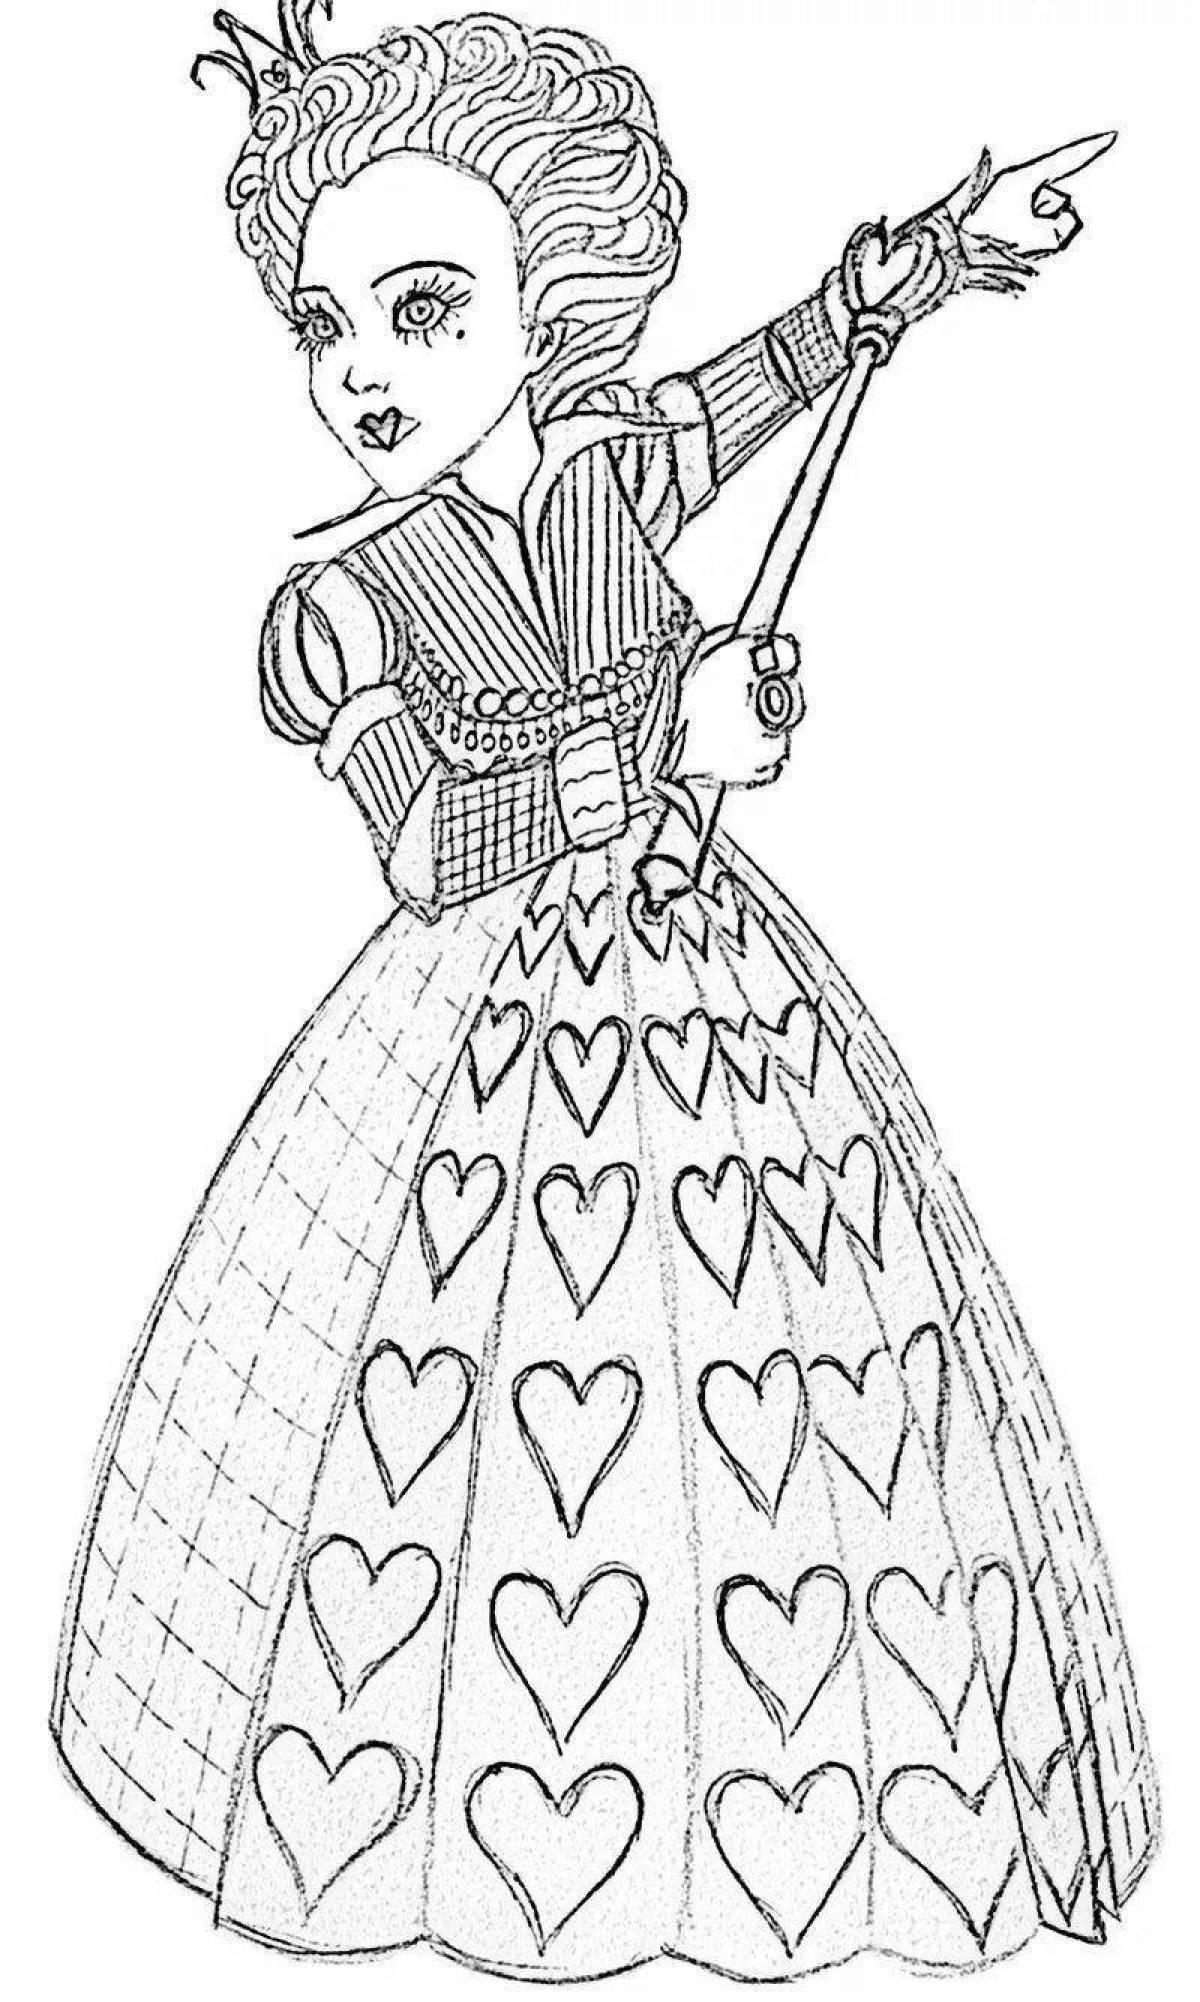 Fancy Hatter coloring page